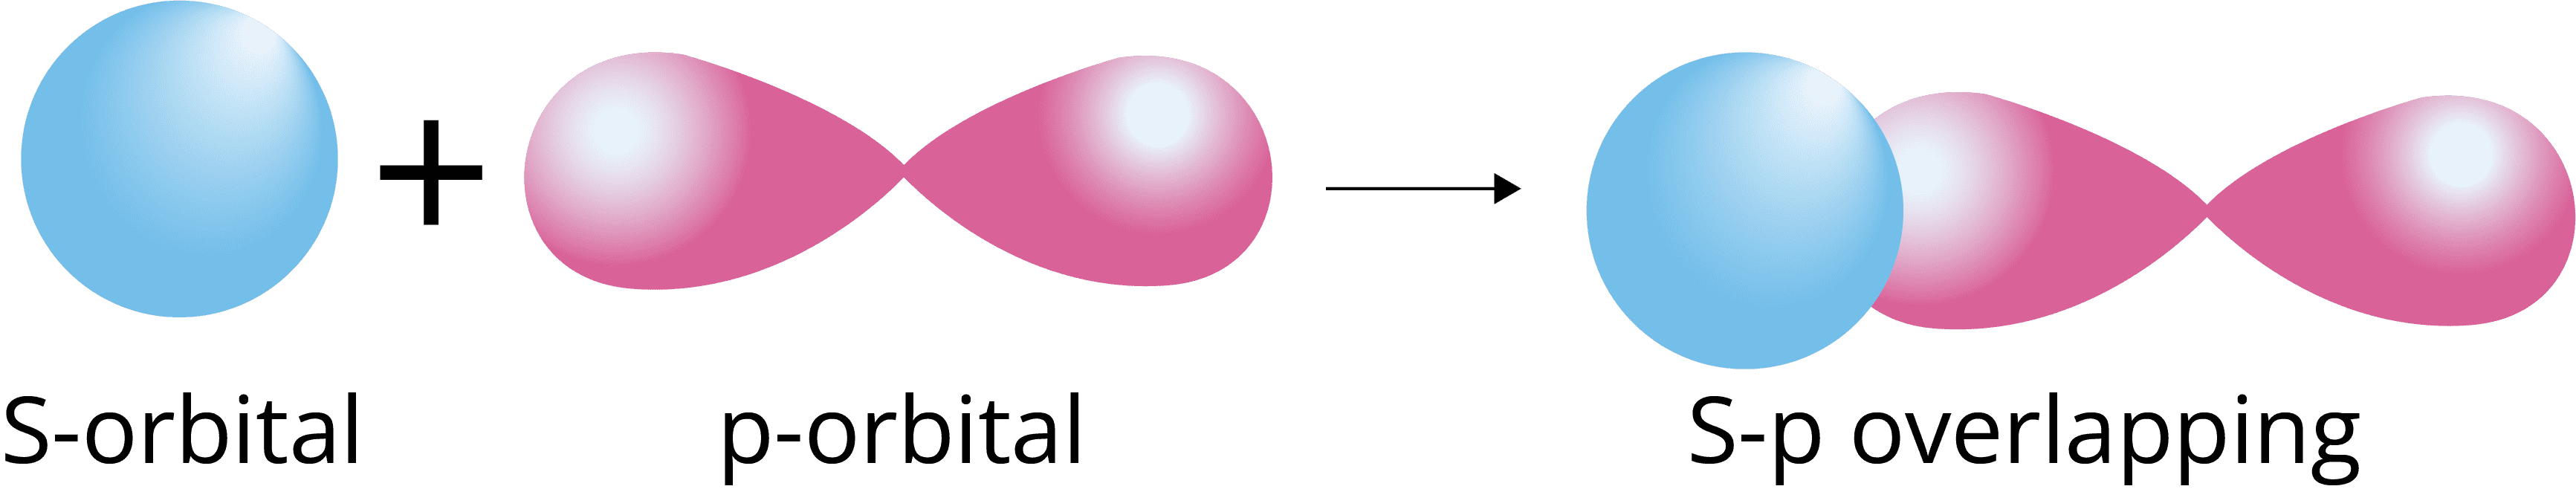 s-p overlapping: The half filled s-orbital of one atom overlaps with the half filled p-orbital of another atom along the internuclear axis.